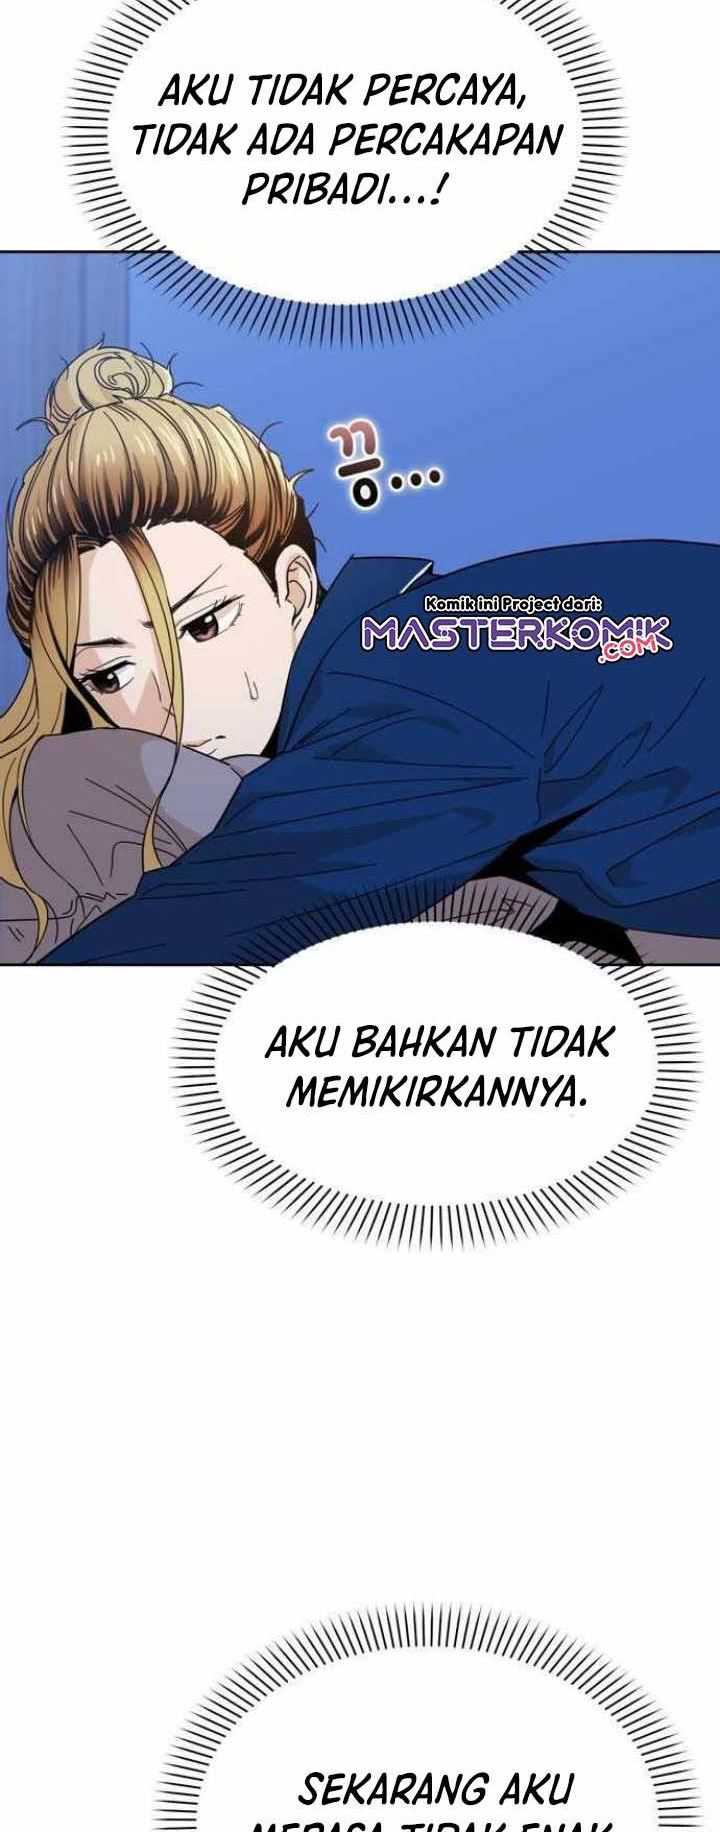 Match Made in Heaven by Chance Chapter 07